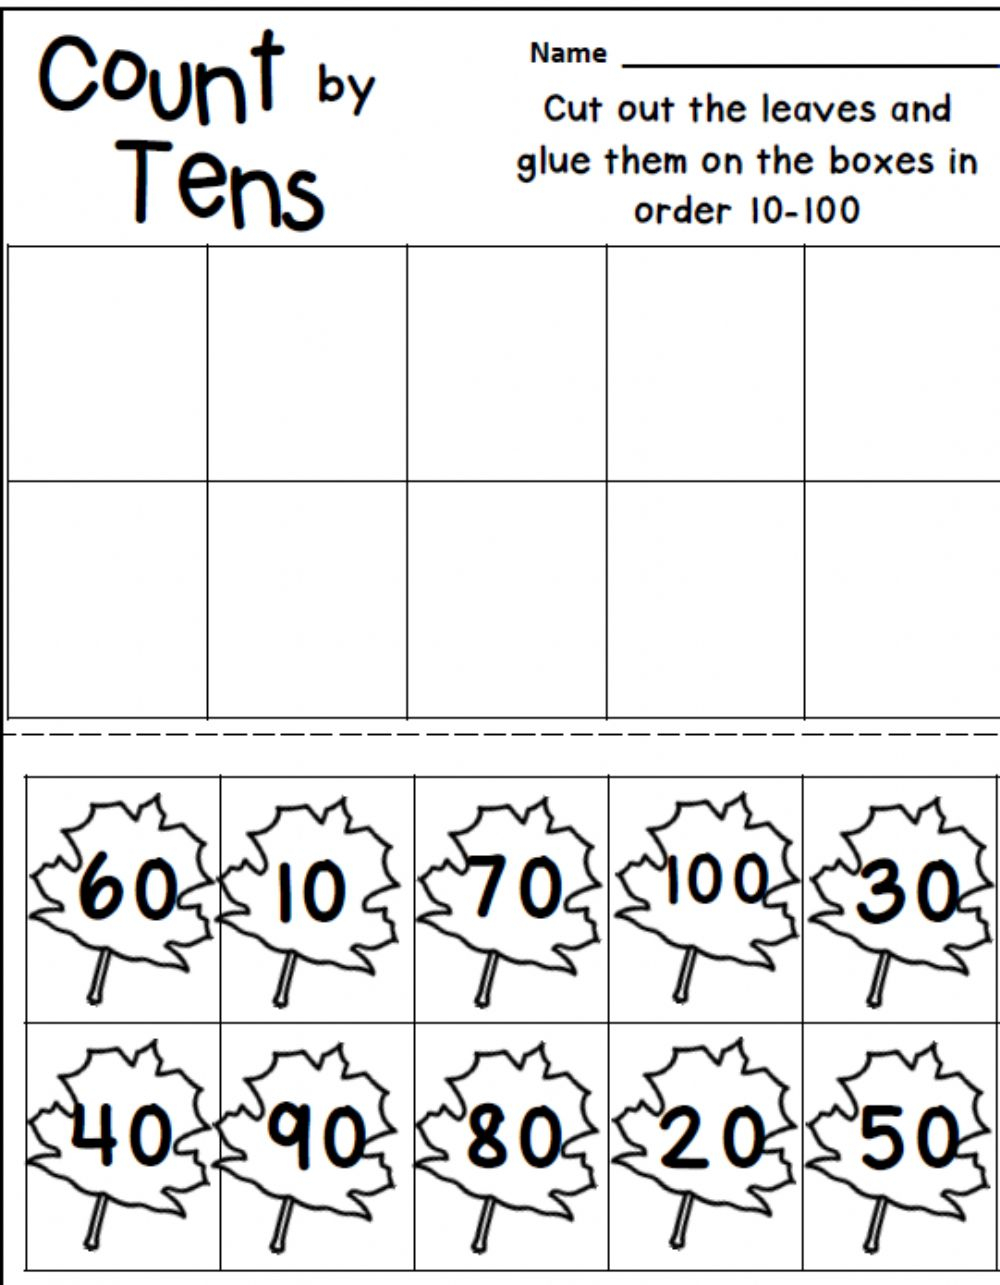 Count By 10s Worksheet